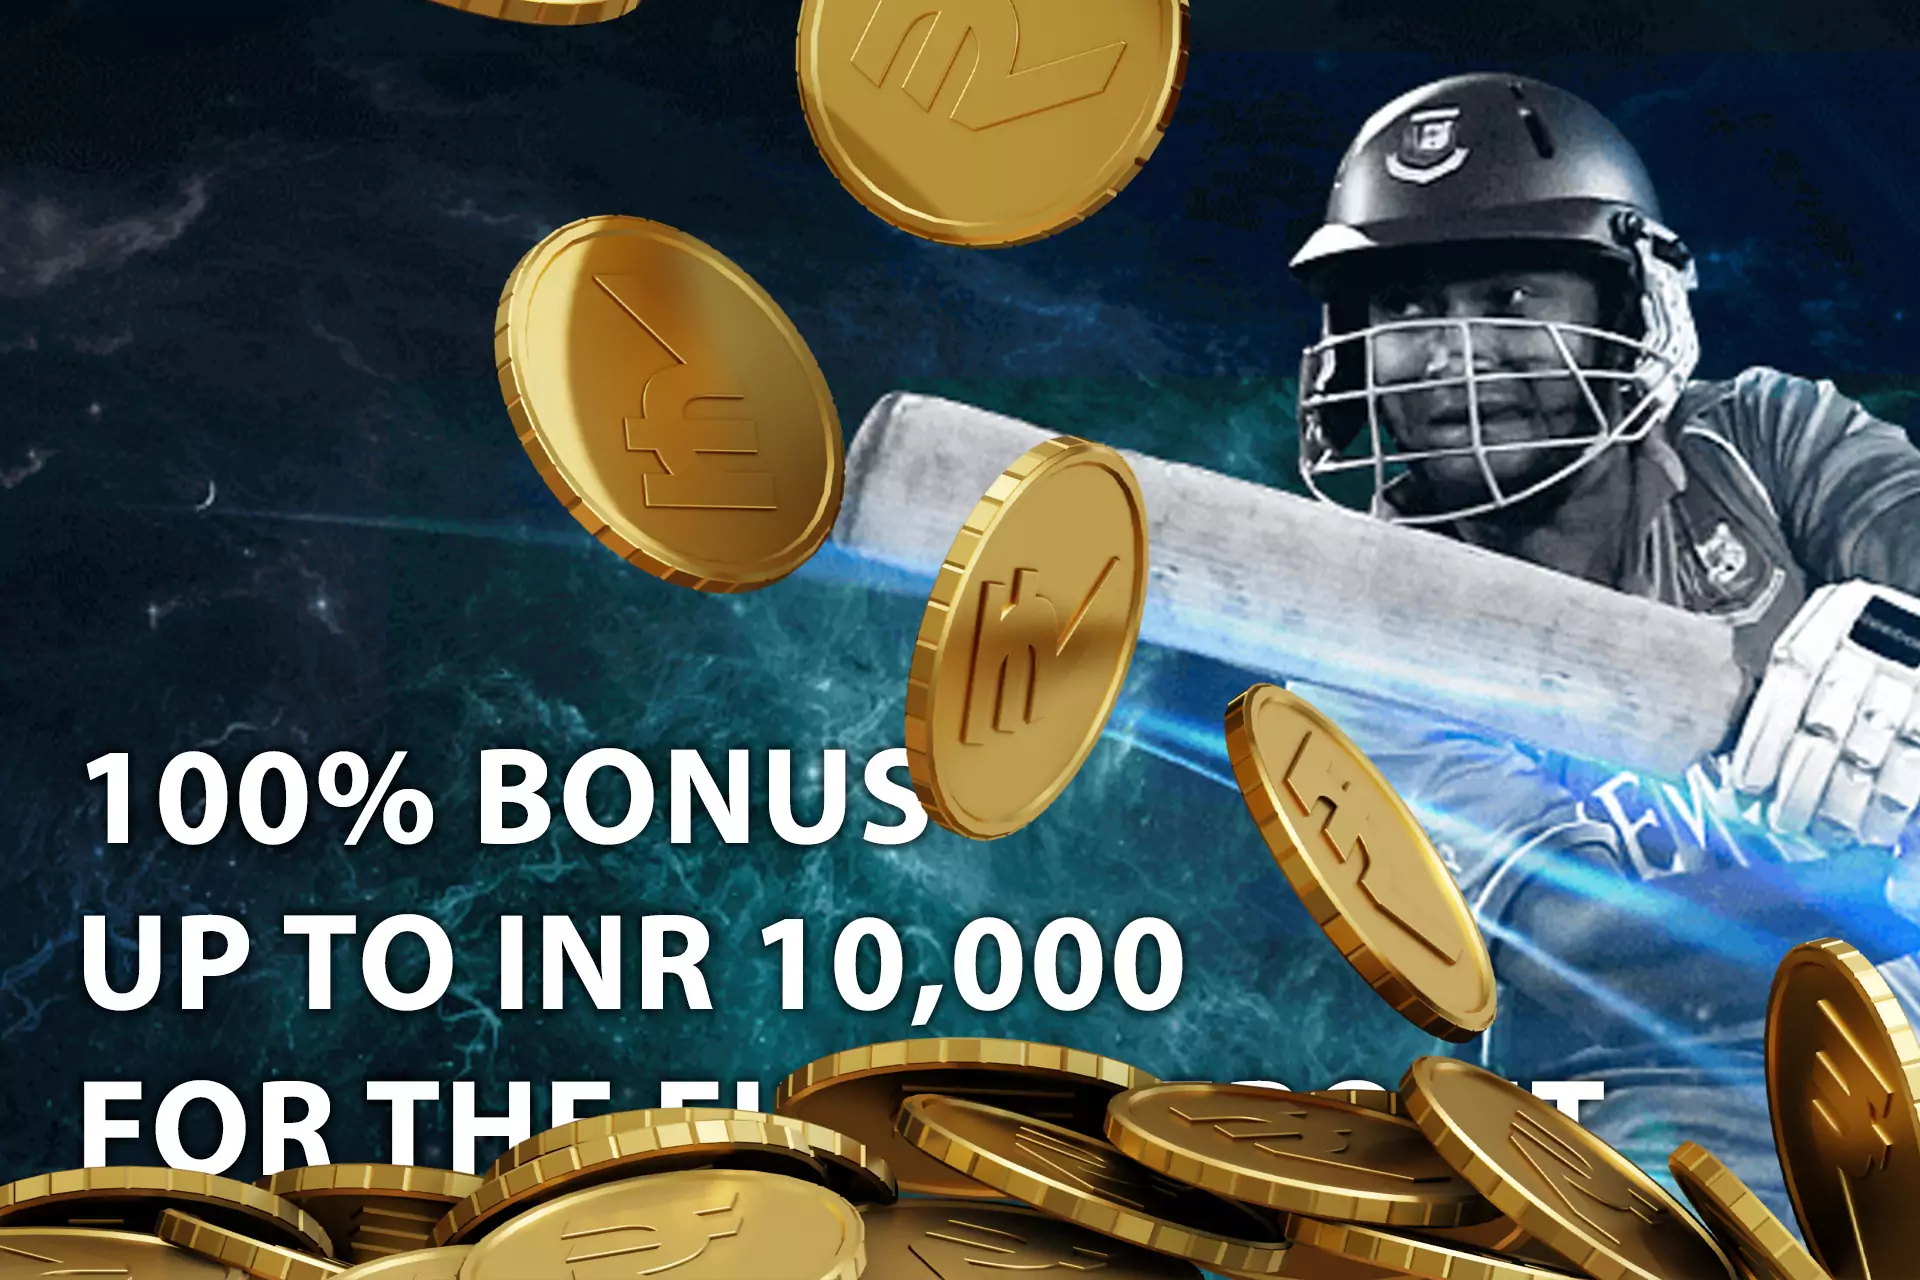 Make the first deposit right after registration to get the welcome bonus on betting.